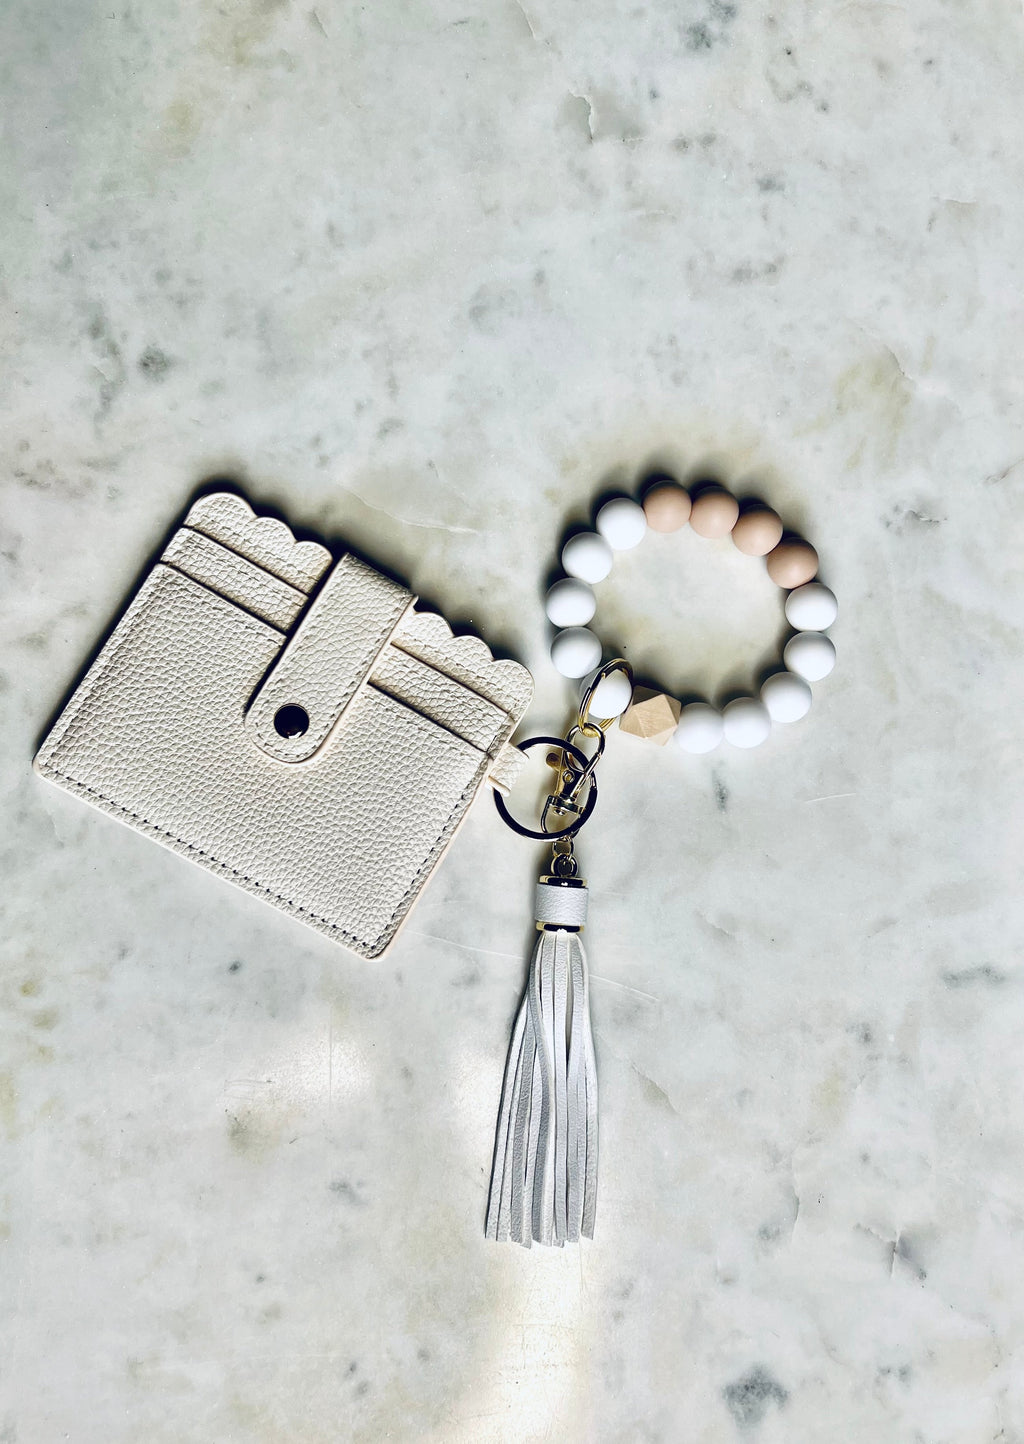 Always on the go? The Boho Chic O Wristband Keychain has got you covered! Made with 15-mm silicone beads, a split ring, clasp, and leather tassel, it's the perfect companion for life on-the-move. Plus, it comes with a super convenient credit card and ID holder, complete with a key ring to quickly hook up your keys. Whip it around your wrist and zoom out the door - no hassle, no fuss!